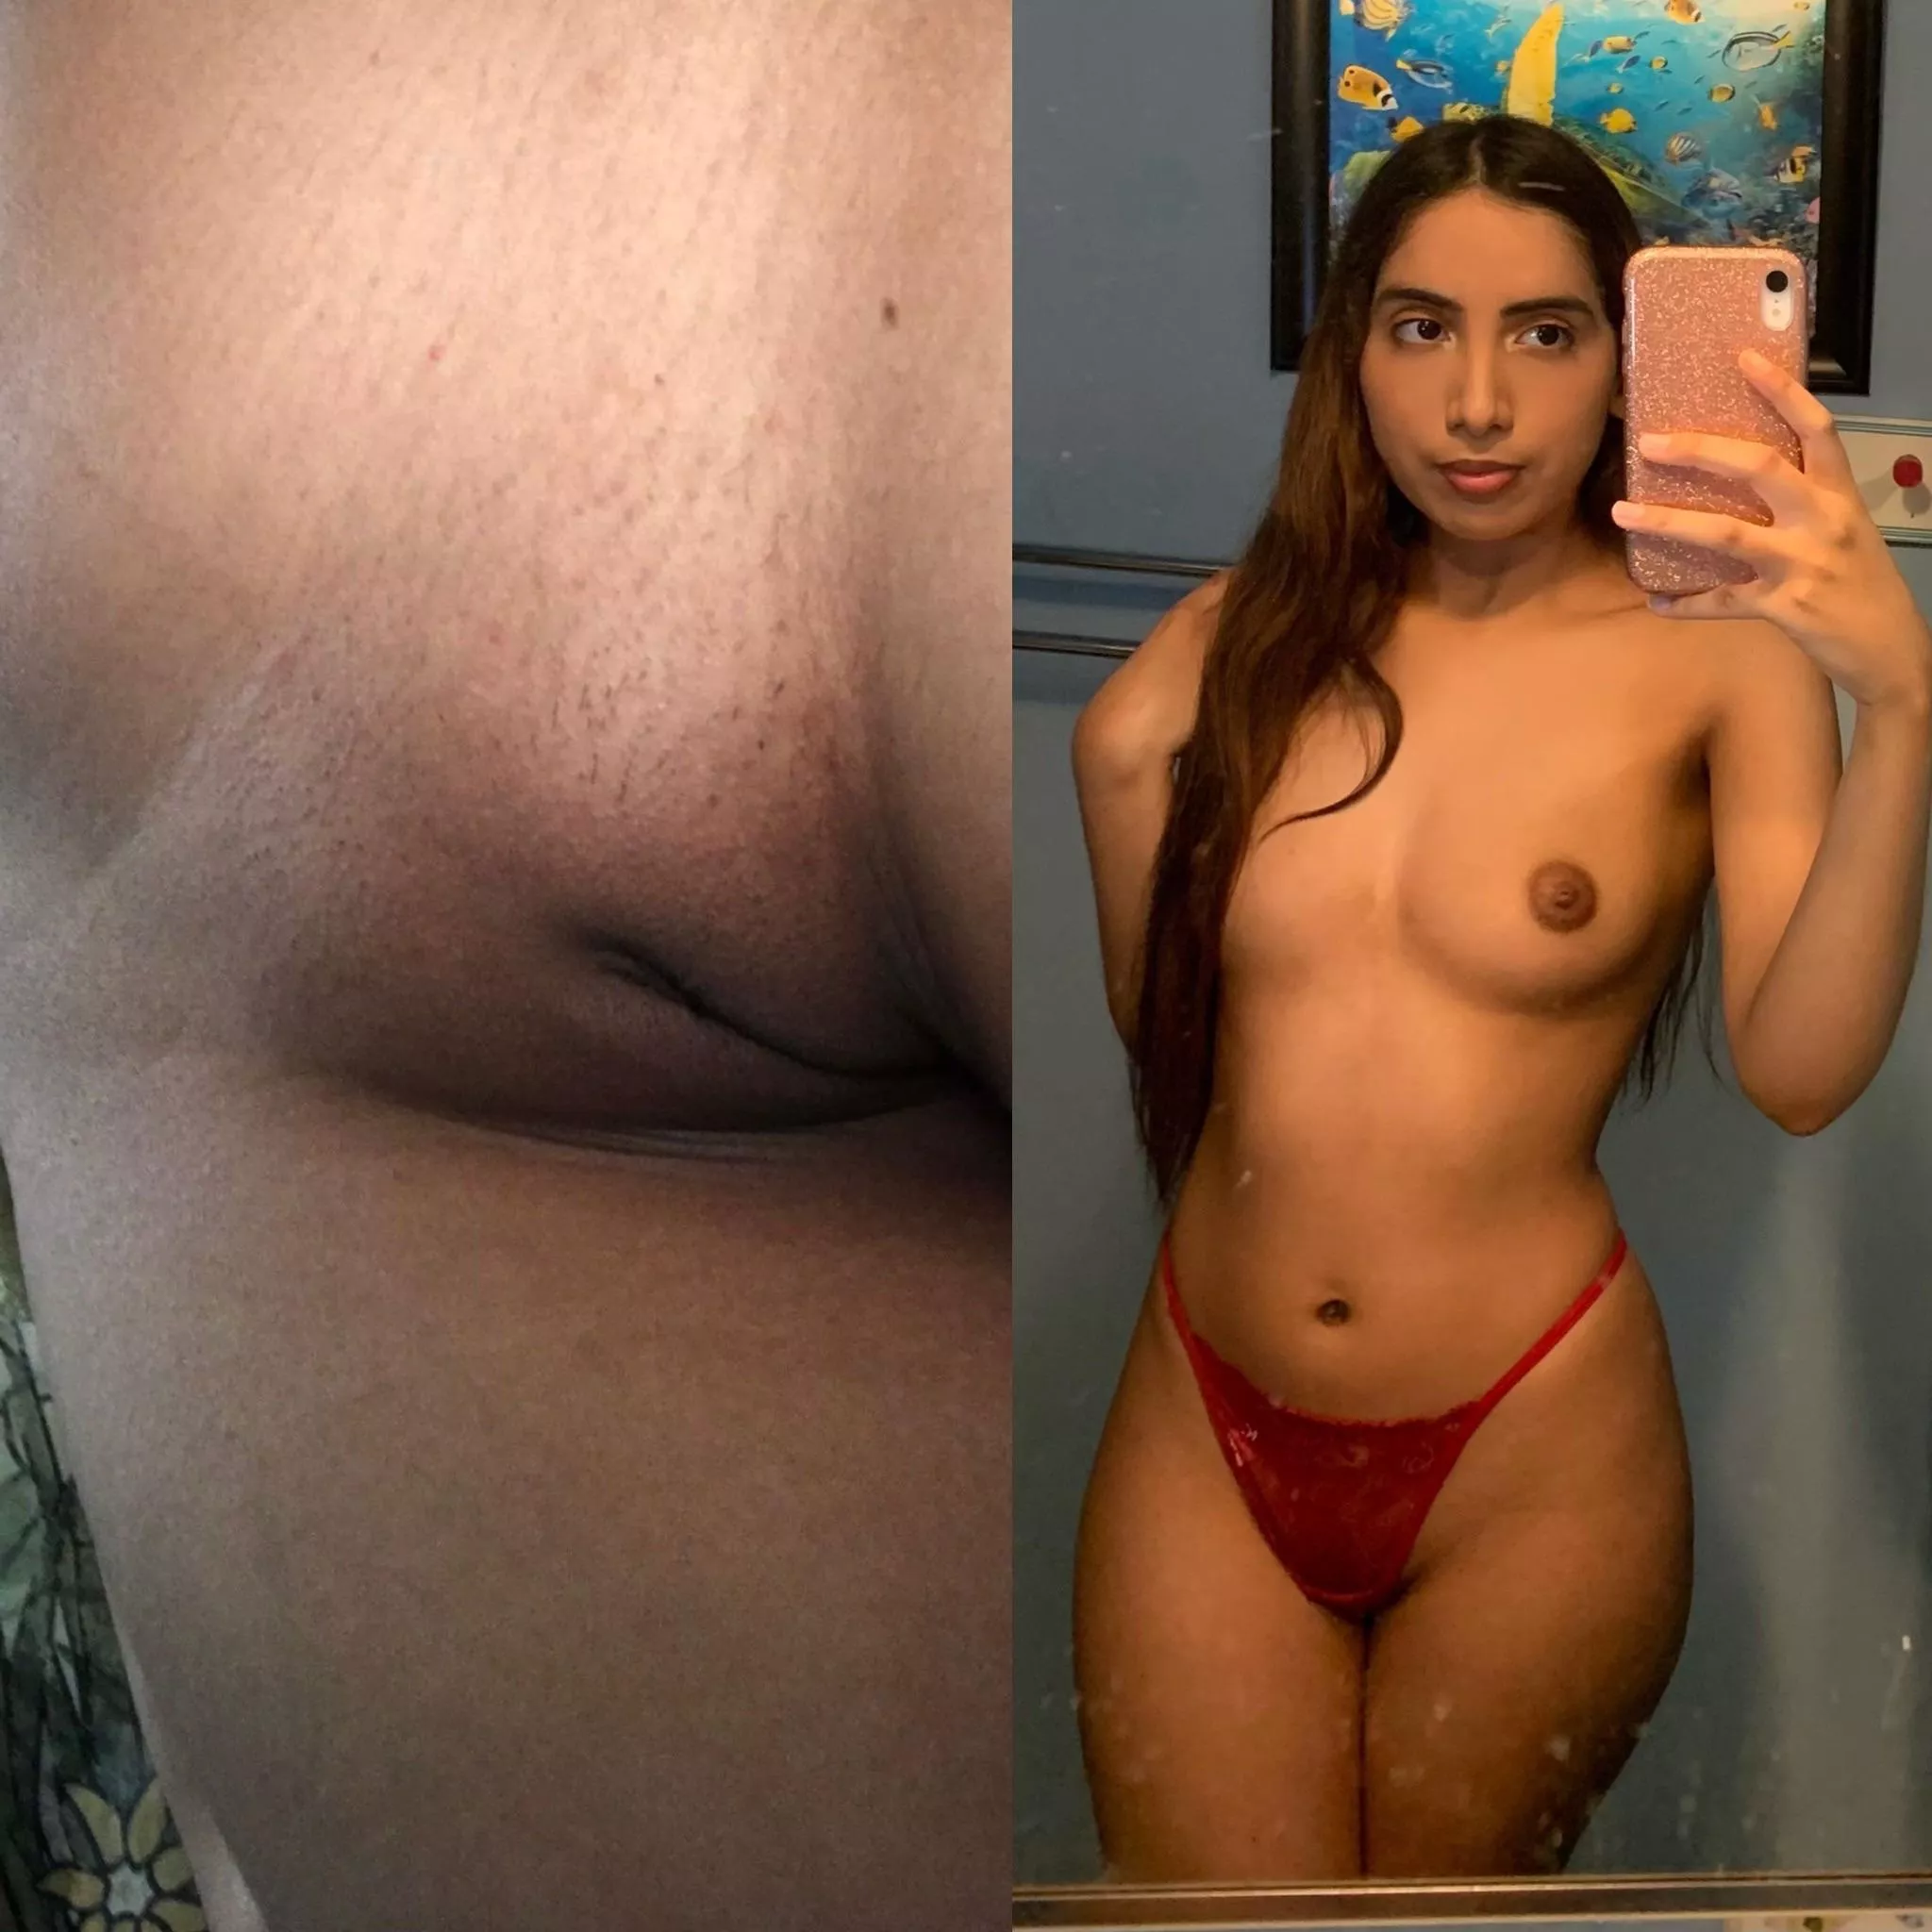 Mexican Girls Pussy - Can I interest you in some Mexican pussy? nudes : gonewildcolor | NUDE -PICS.ORG